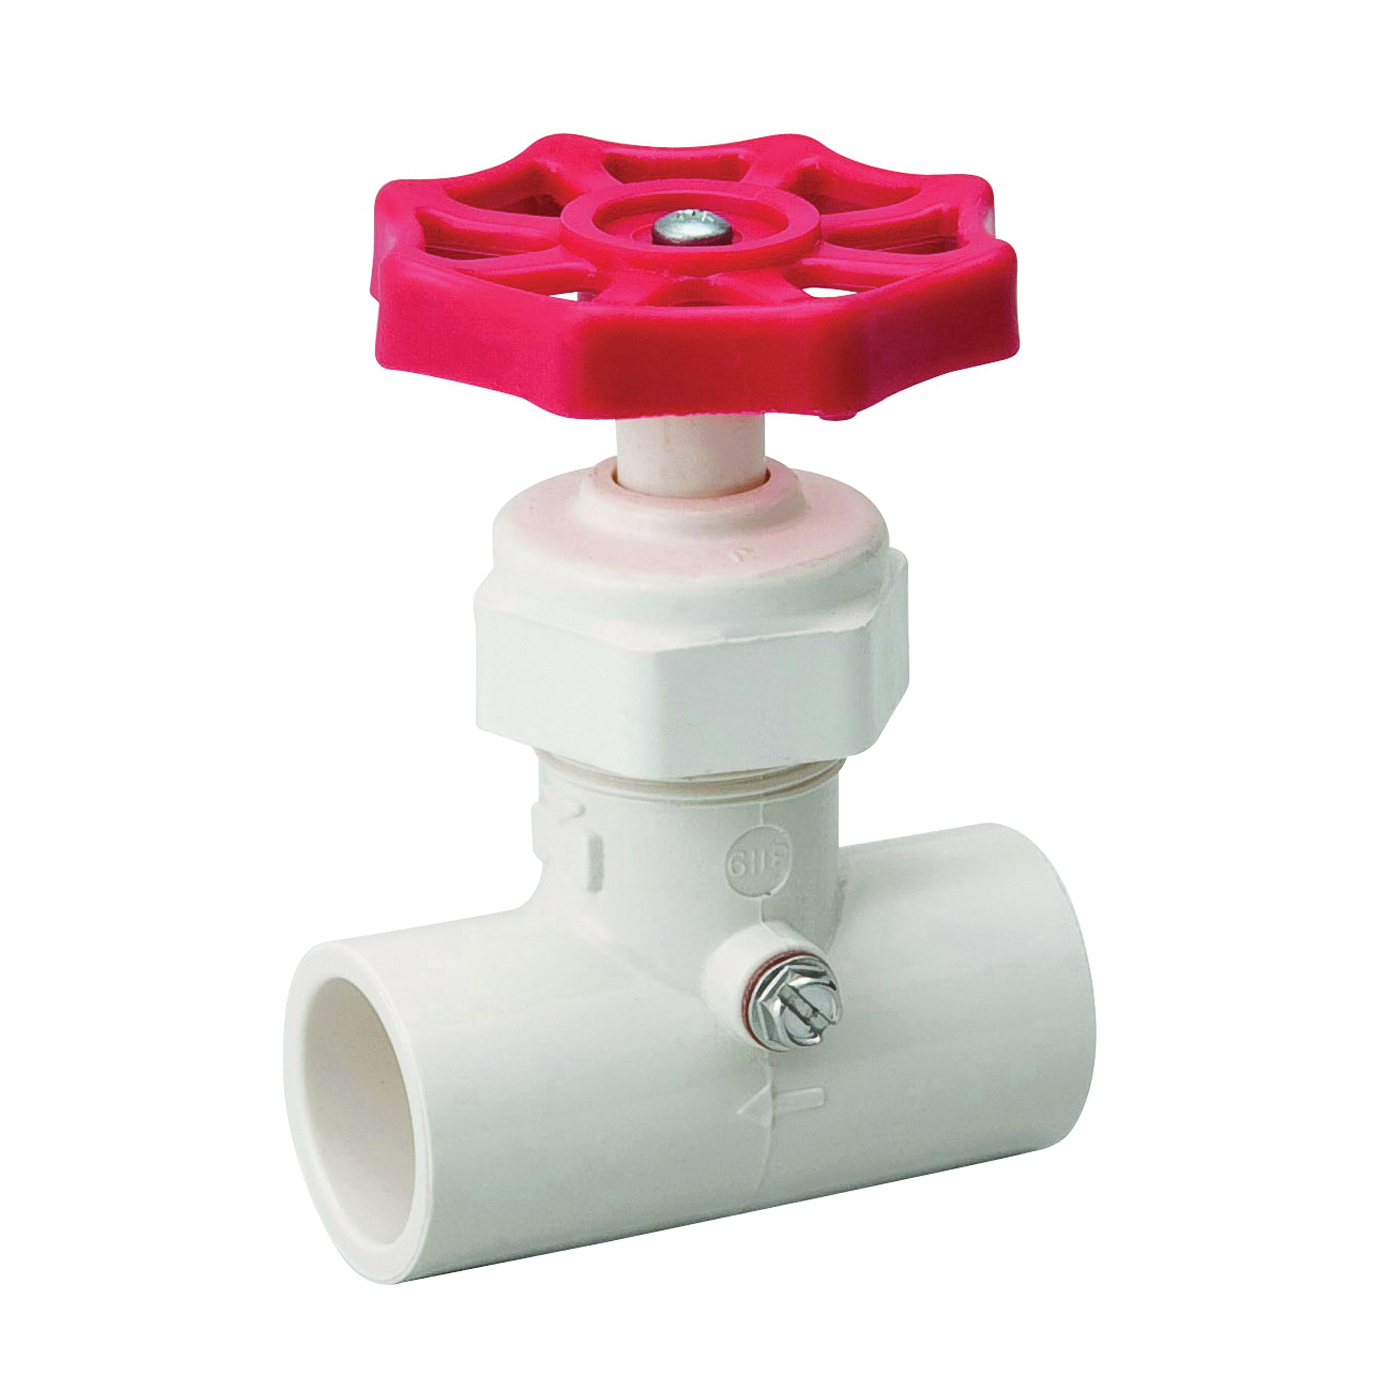 105-324 Stop and Waste Valve, 3/4 in Connection, Compression, 100 psi Pressure, CPVC Body